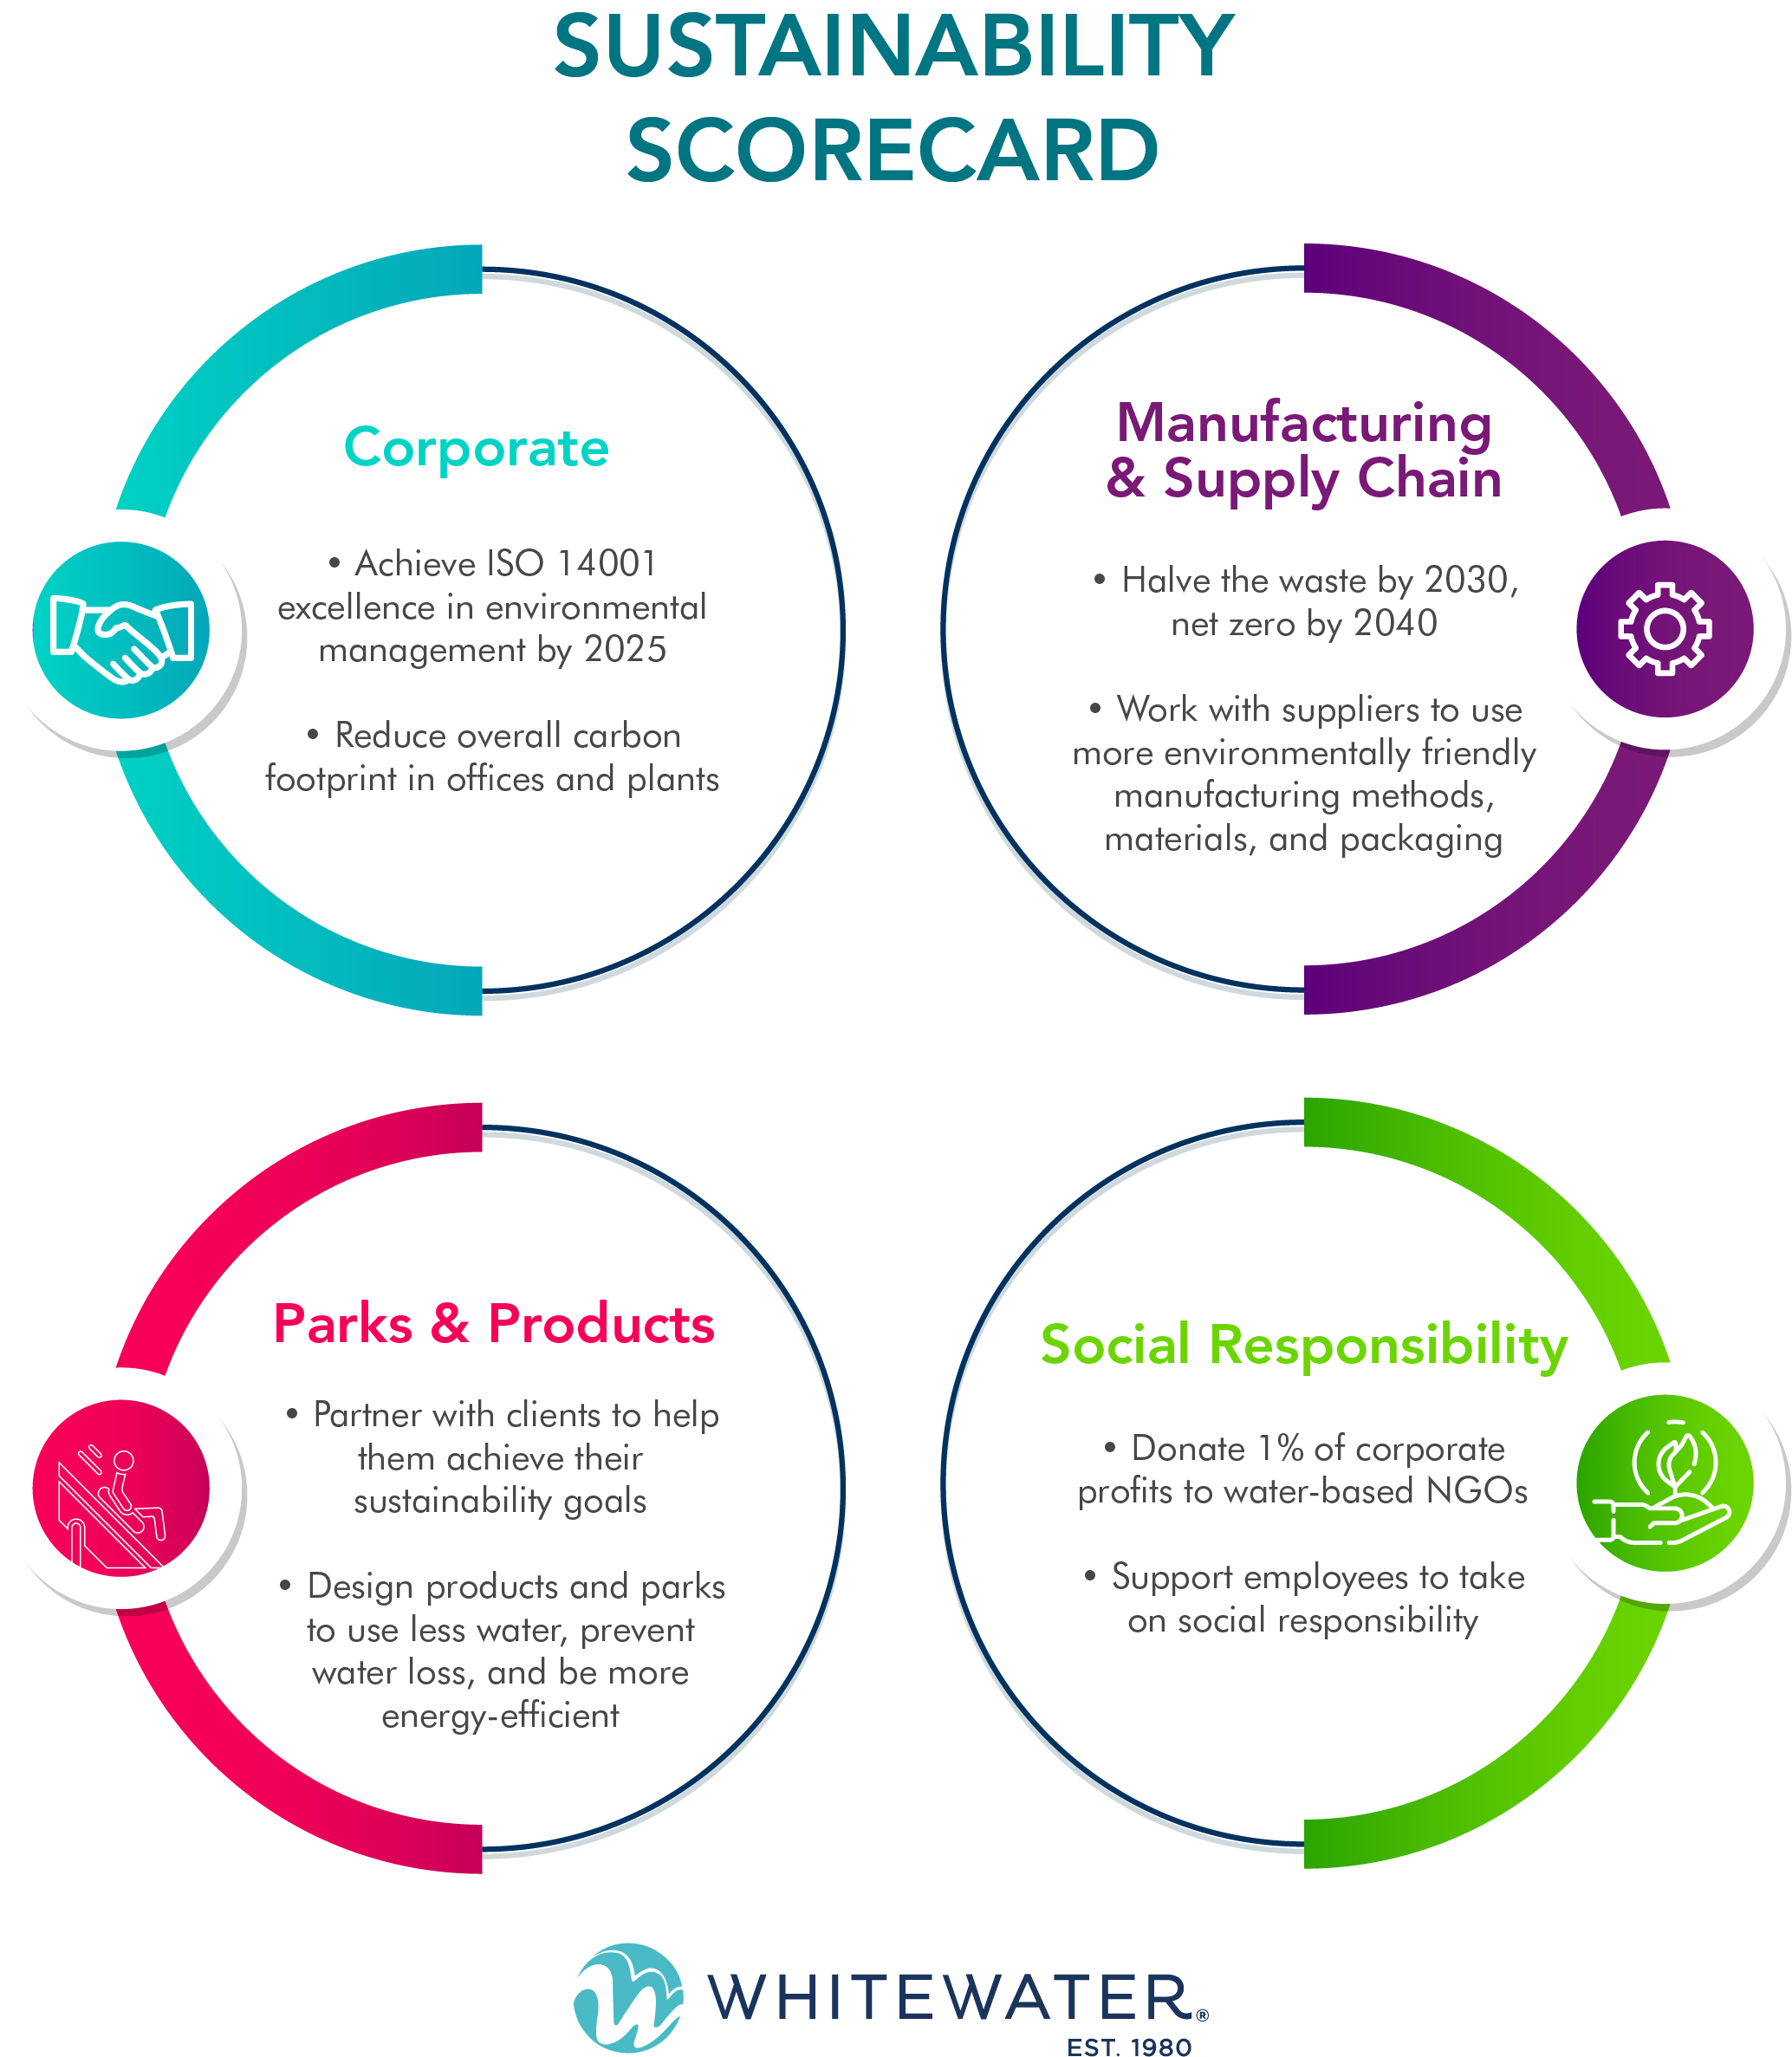 WhiteWater's Sustainability Scorecard comprises 4 parts: Corporate, Manufacturing & Supply Chain, Parks & Products, Social Responsibility.